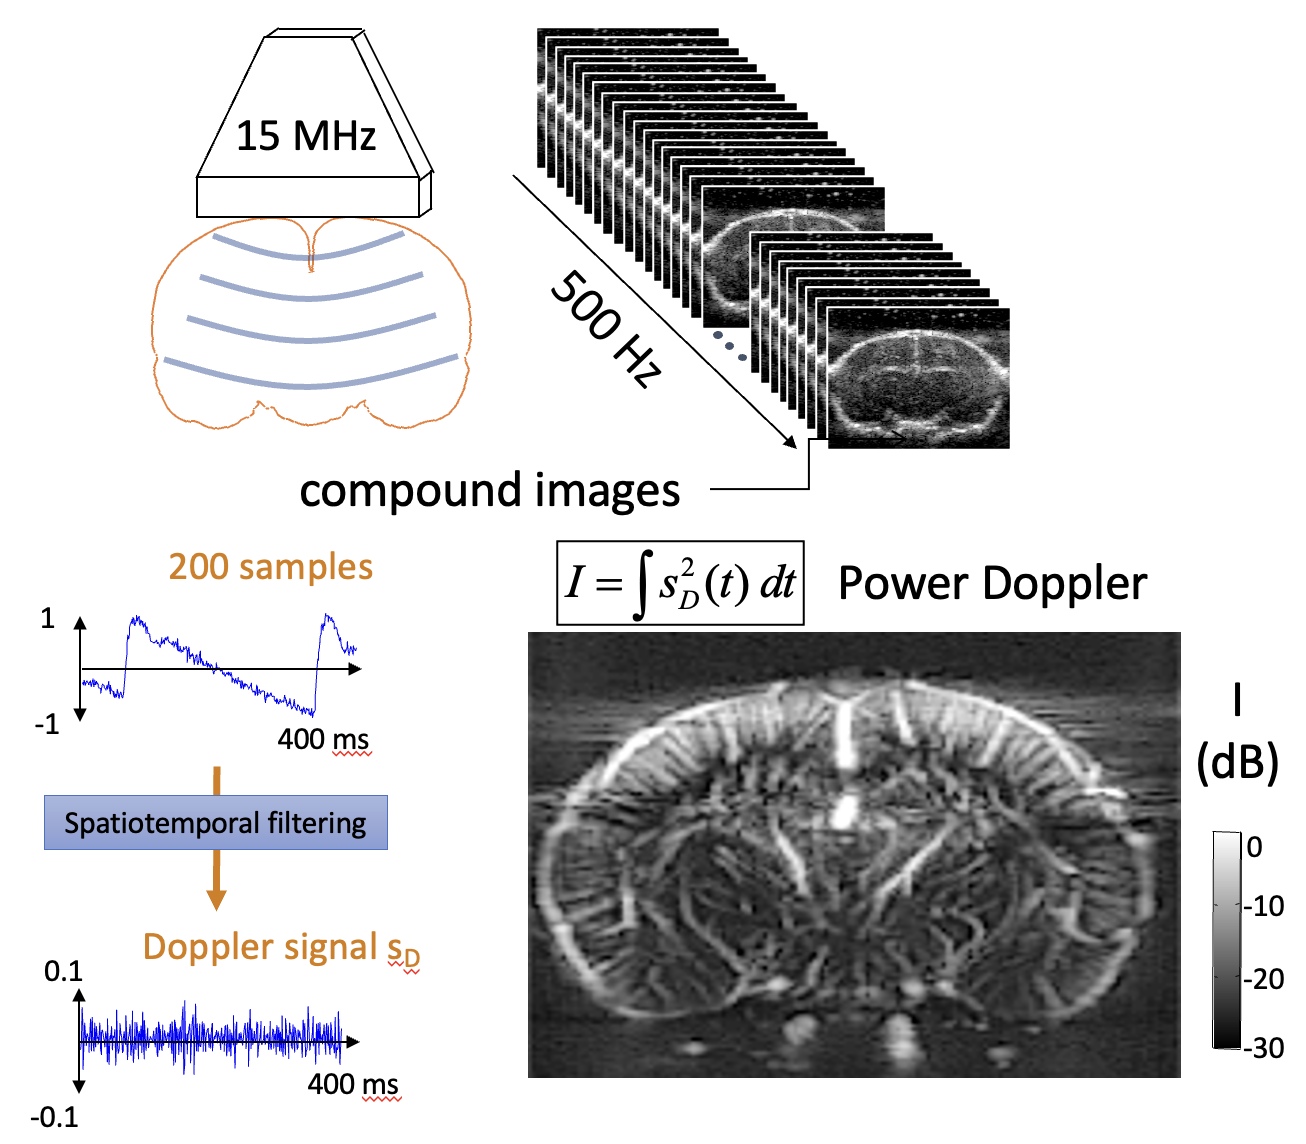 The principle of functional ultrasound and how it improves on conventional ultrasound – by combining high-frequency plane-wave echoes into a single frame, and by monitoring echoes from the whole scanning region simultaneously.